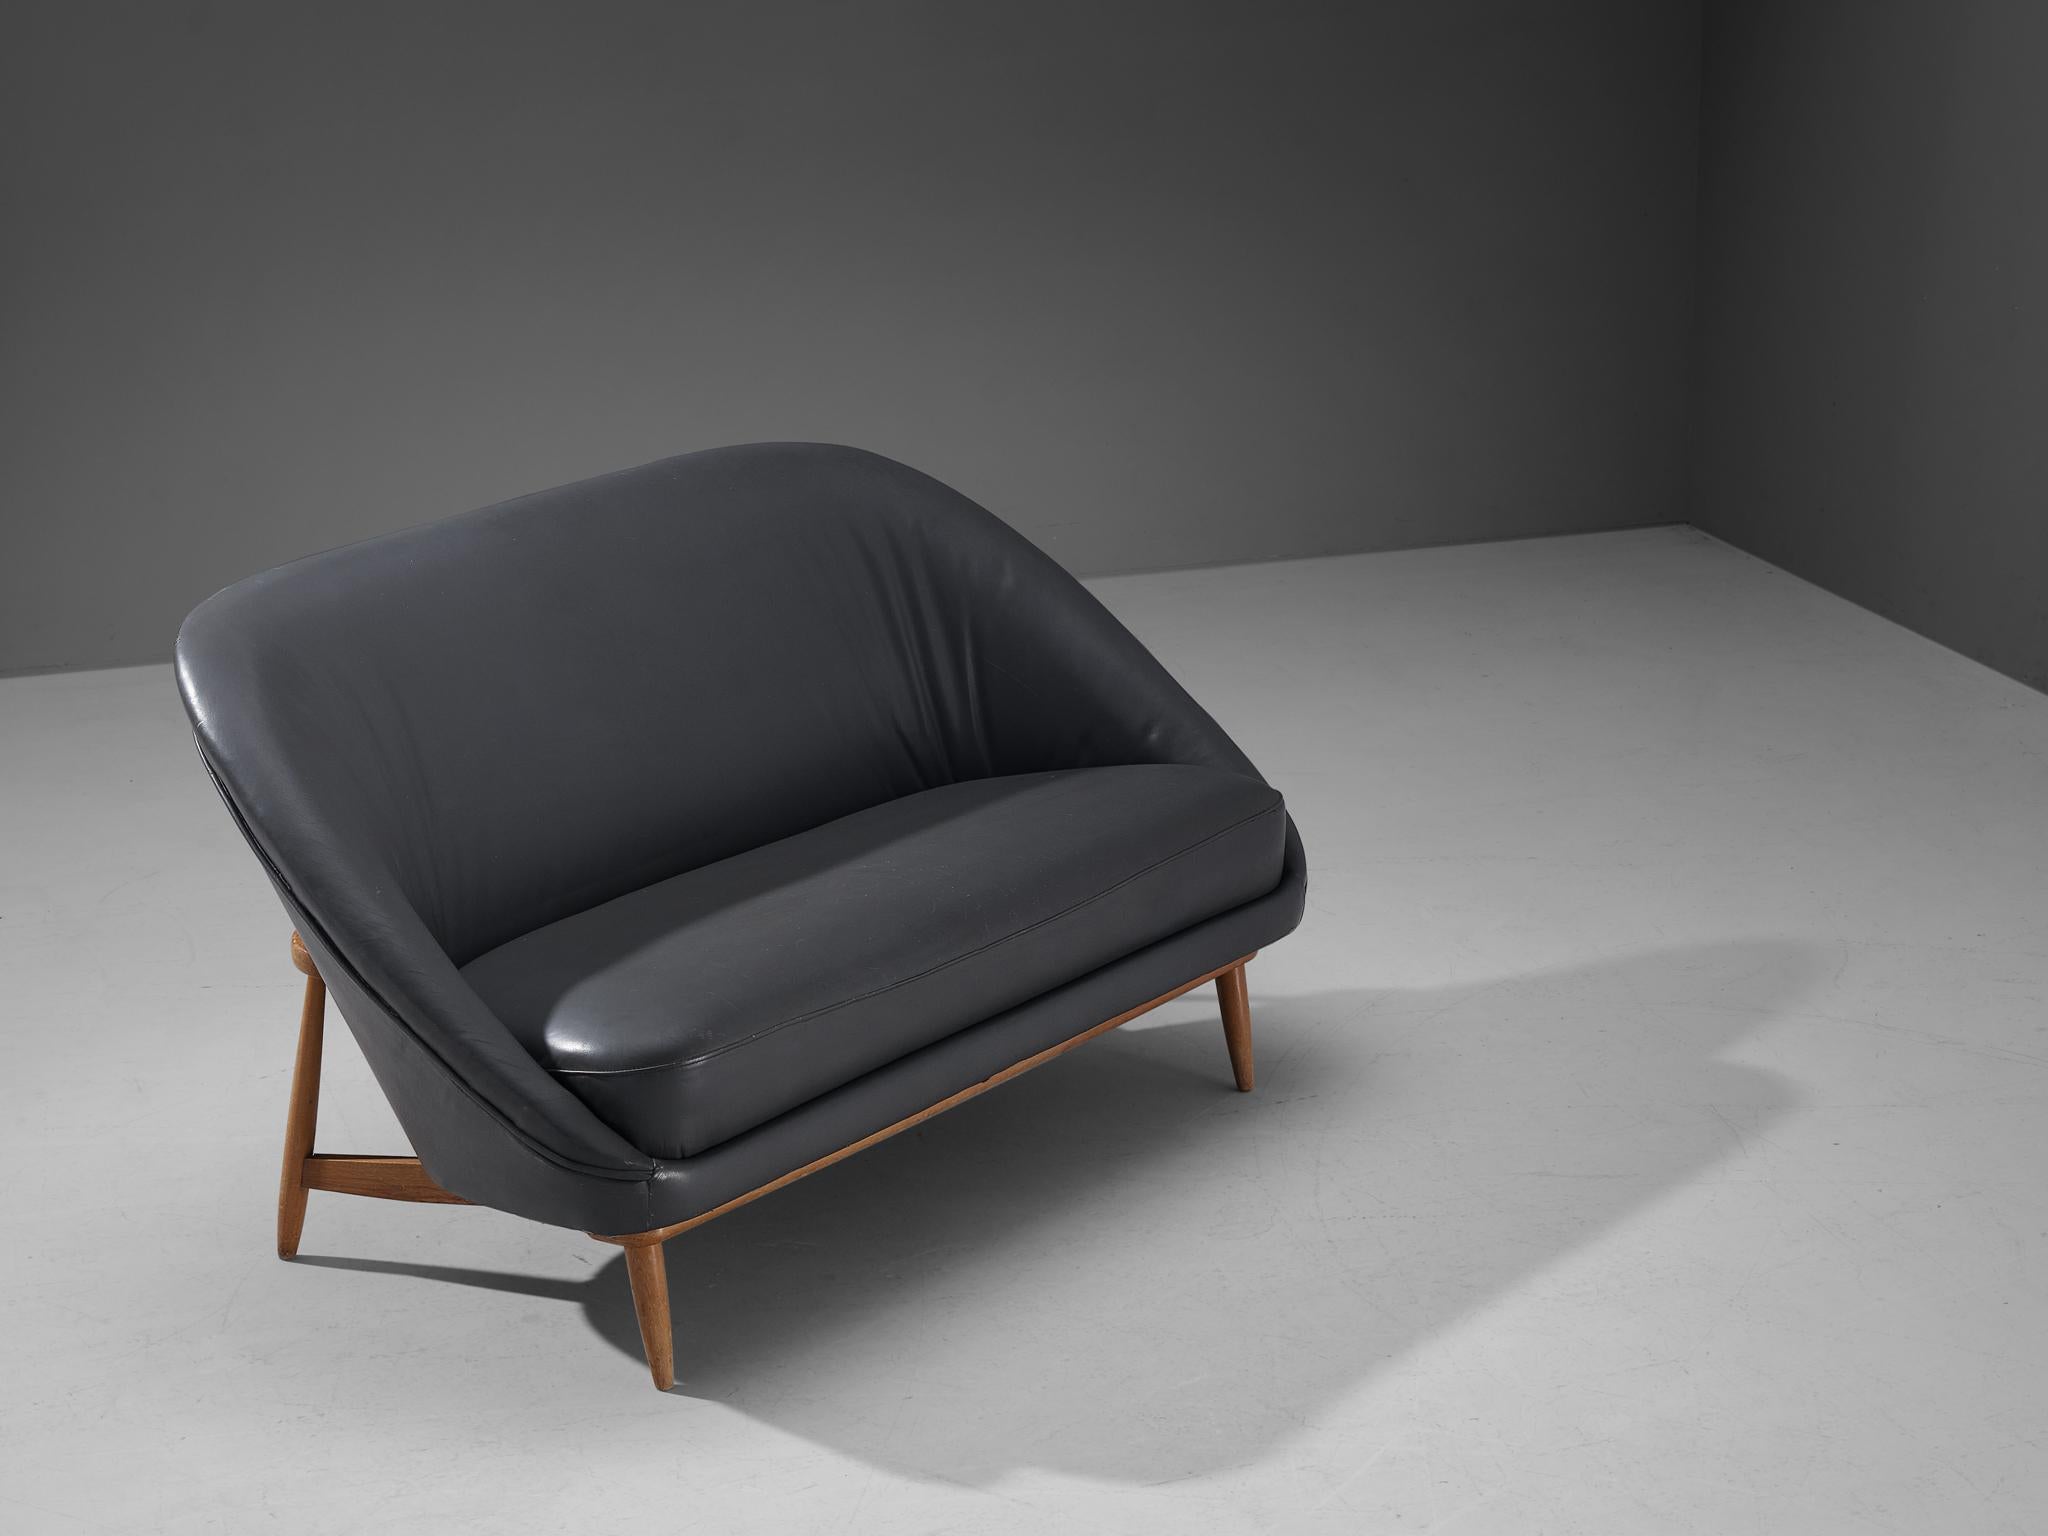 Theo Ruth for Artifort, sofa model '115', leather, stained beech, The Netherlands, 1950s

A Dutch settee by Theo Ruth currently upholstered in dark grey leather. The back tilts slightly backwards and has the recognizable natural flow and feel of